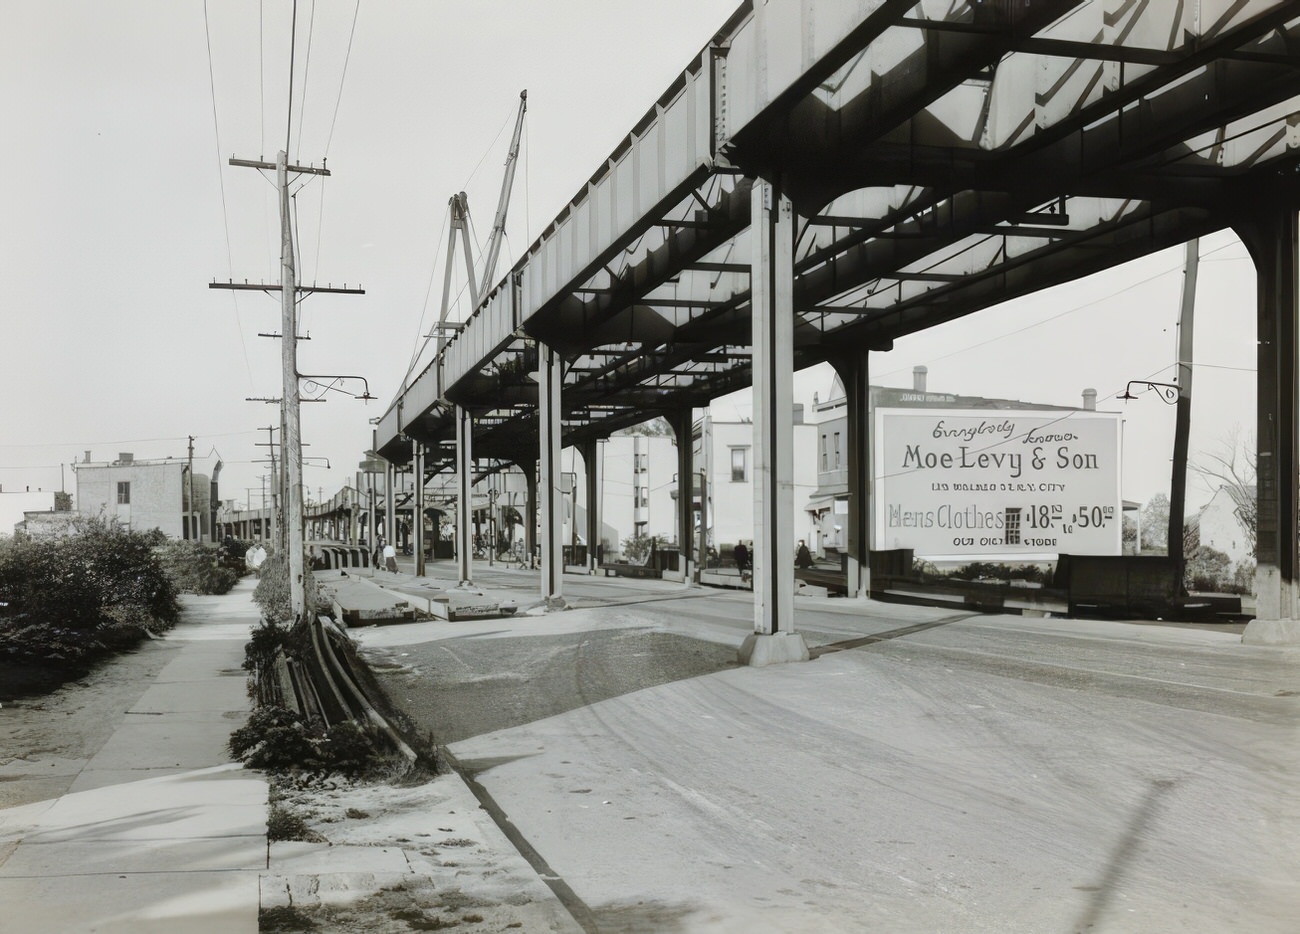 Construction Of Elevated Tracks Along White Plains Rd. Between 238Th -- 239Th Streets, Circa 1915.